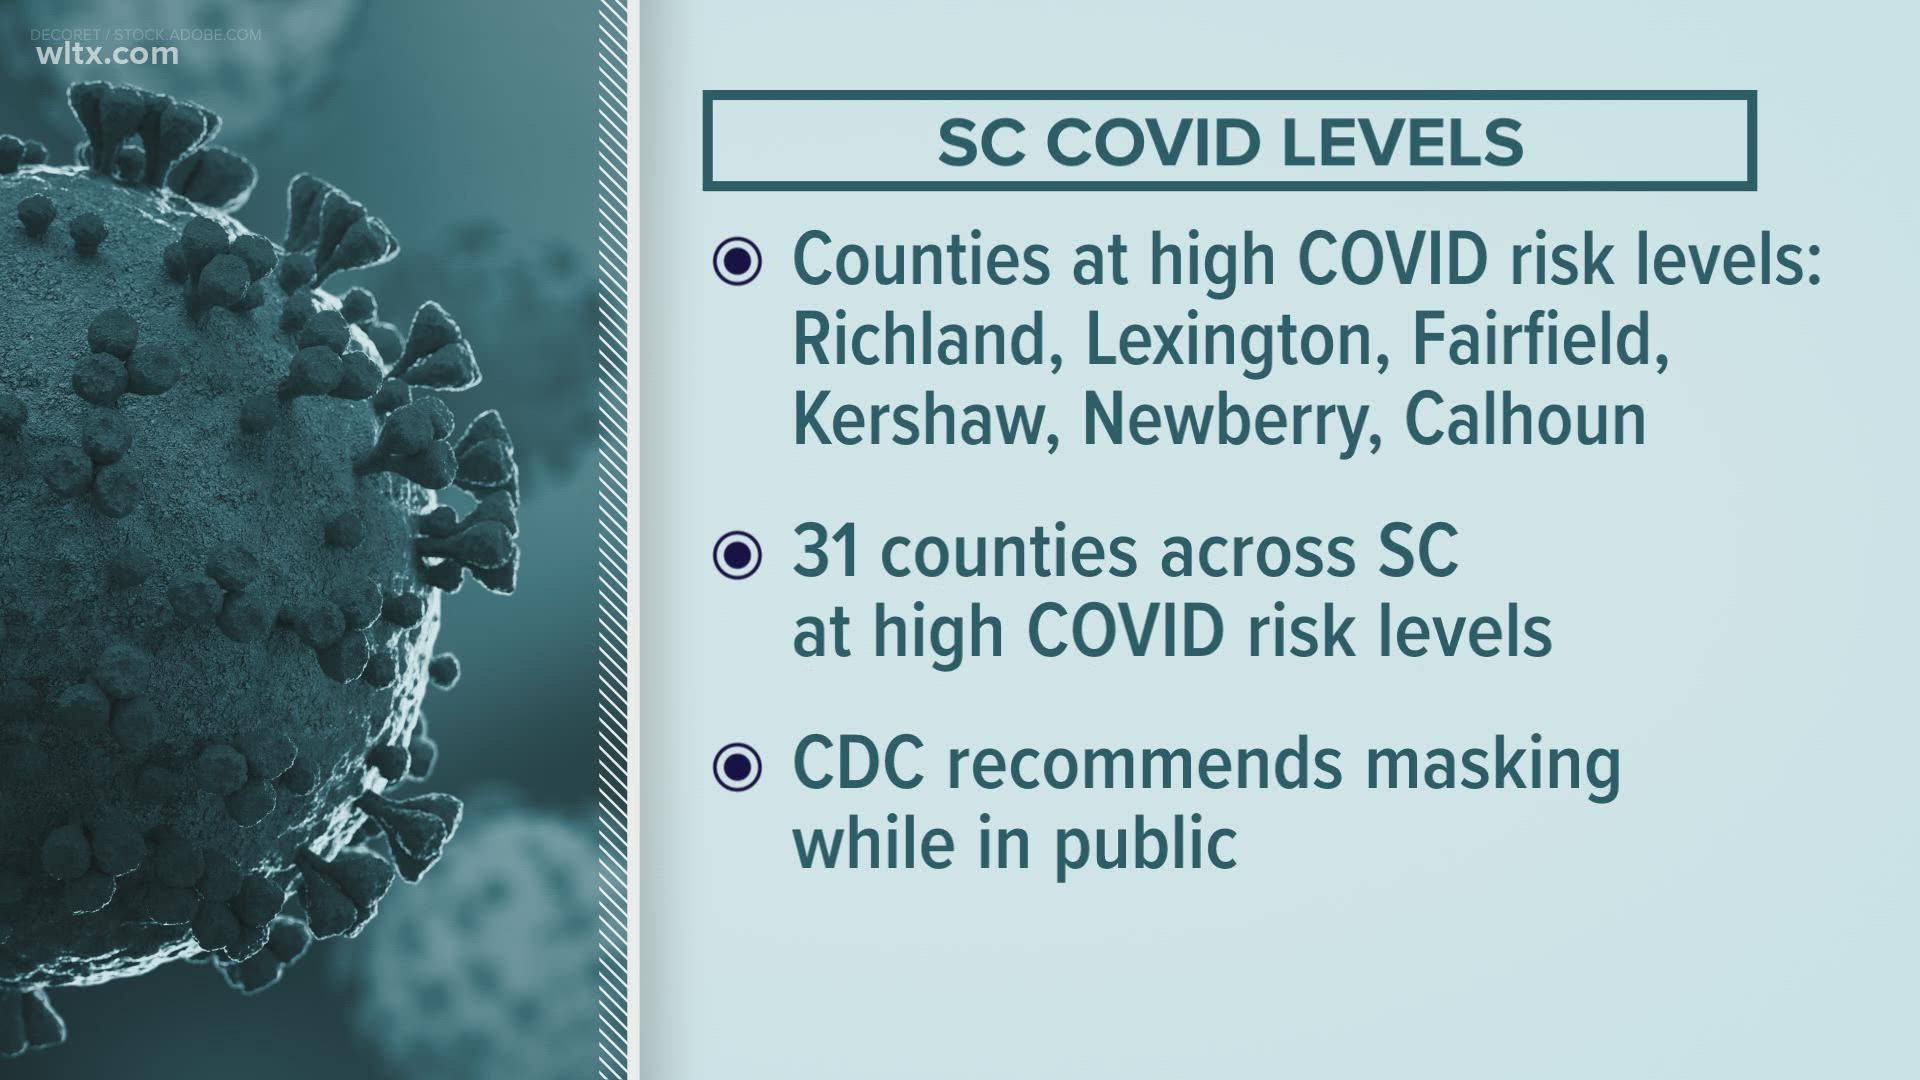 In counties where COVID levels are high, the CDC recommends that you mask up in public, especially while indoors.